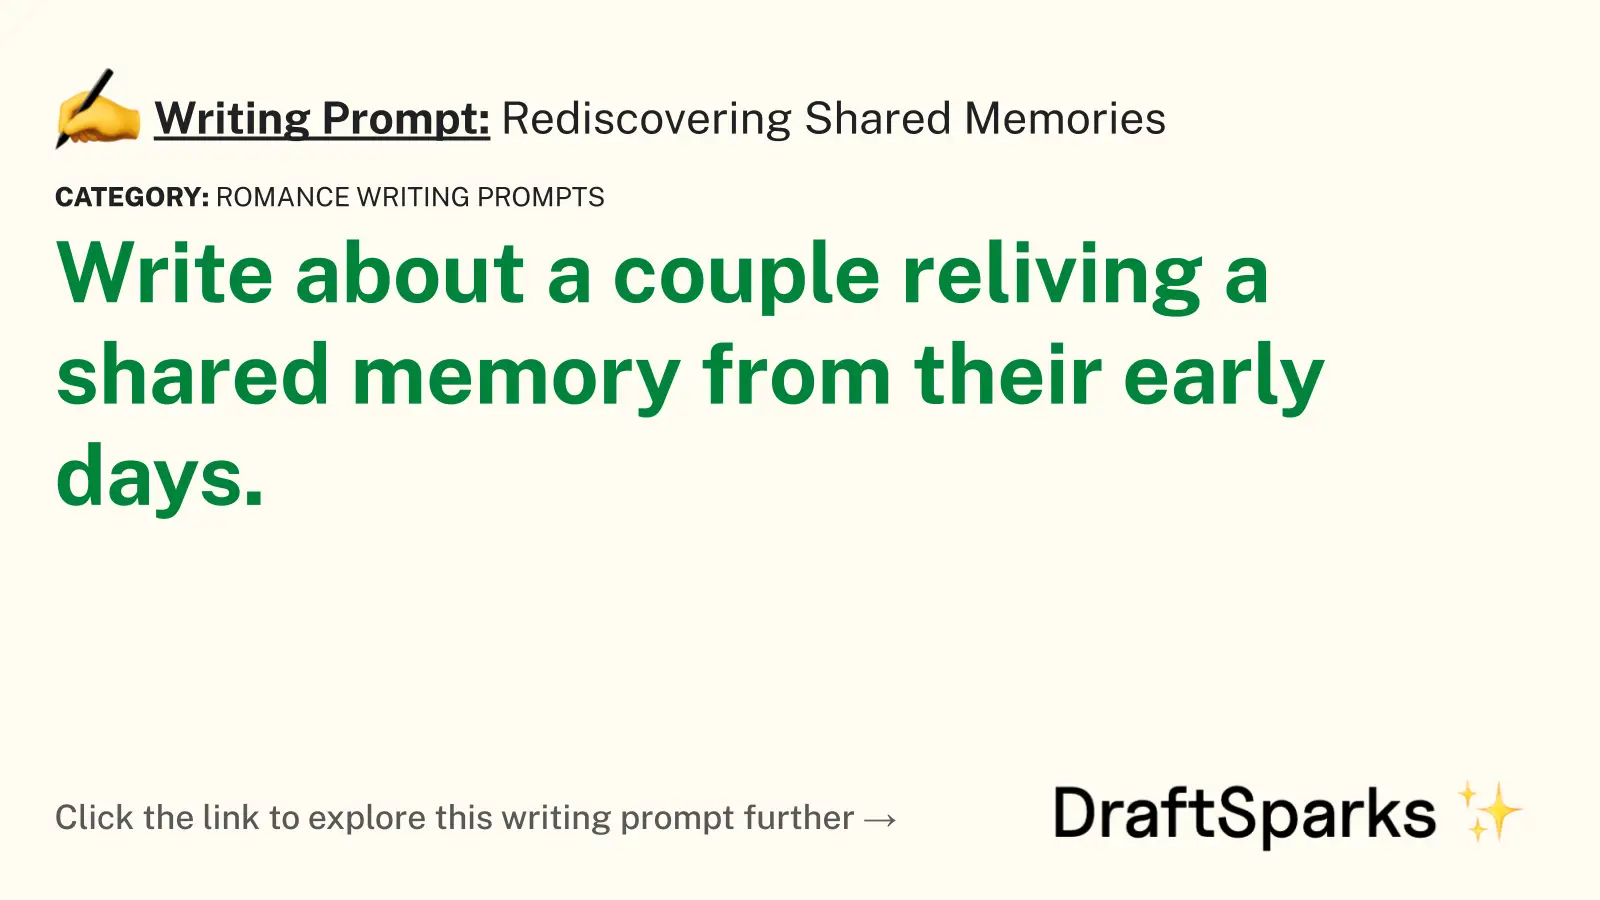 Rediscovering Shared Memories